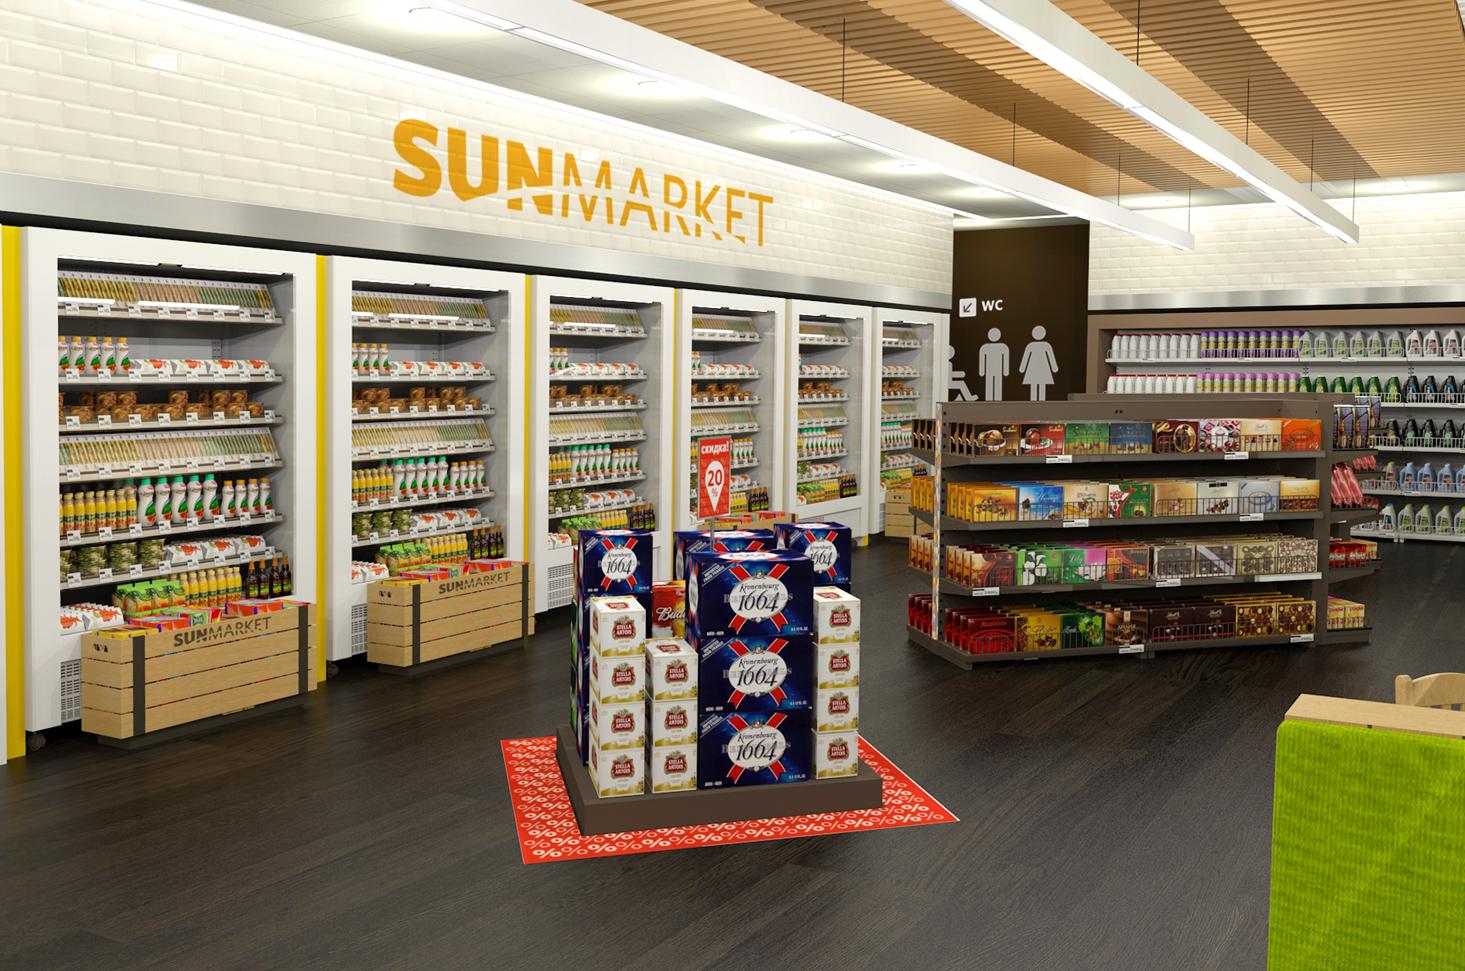 Convenience, flexibility and convergence of cutting edge technology in supermarket design